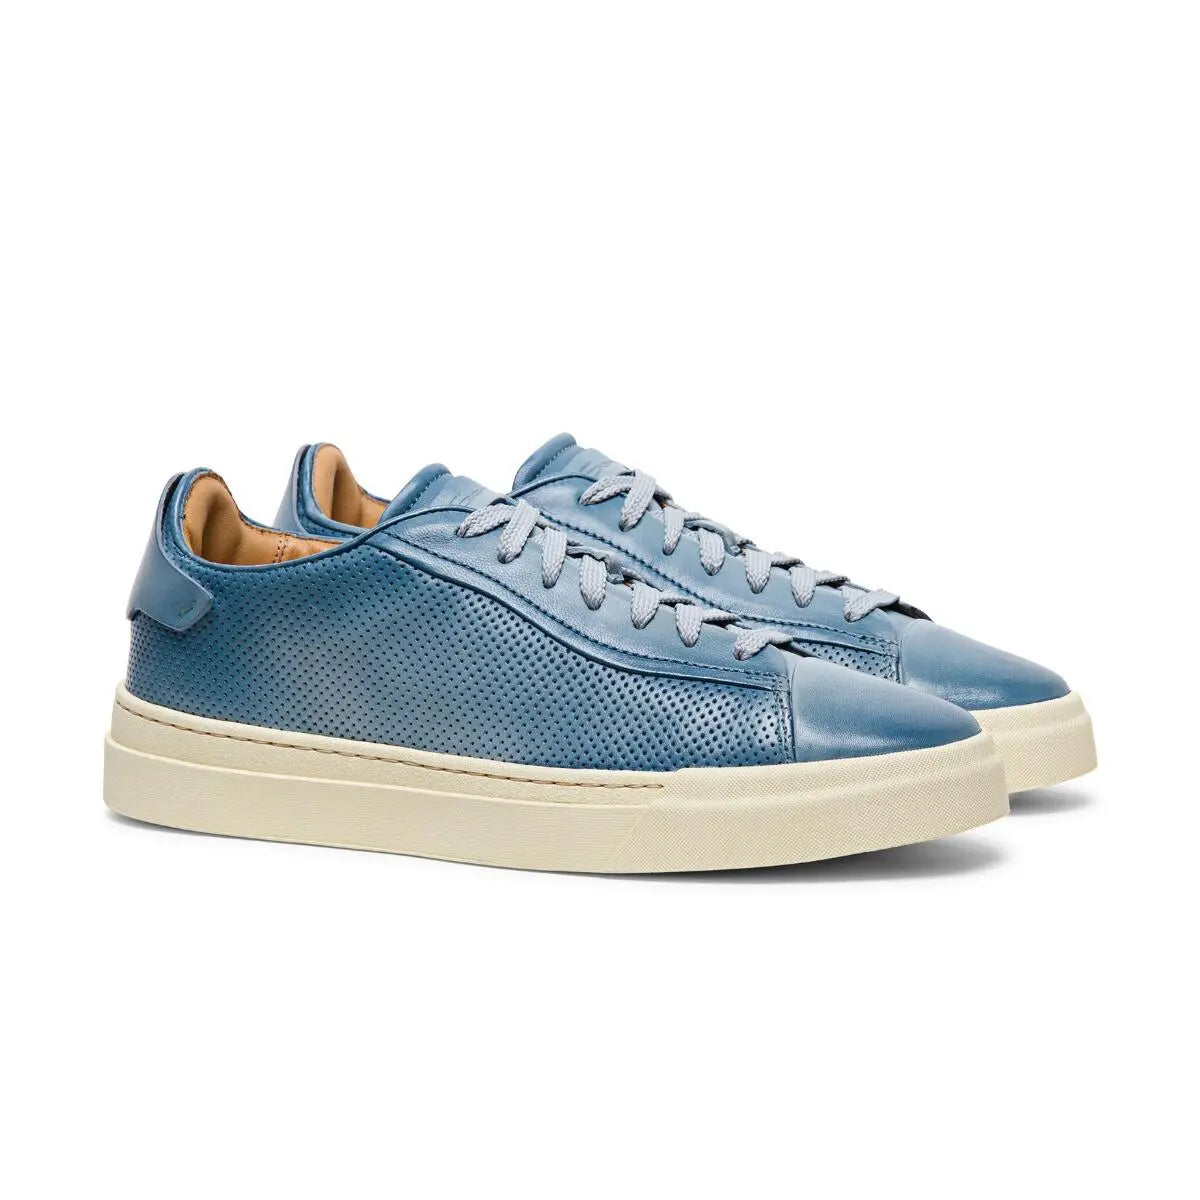 Light Blue Distressed Perforated Effect Leather Sneaker  Santoni   